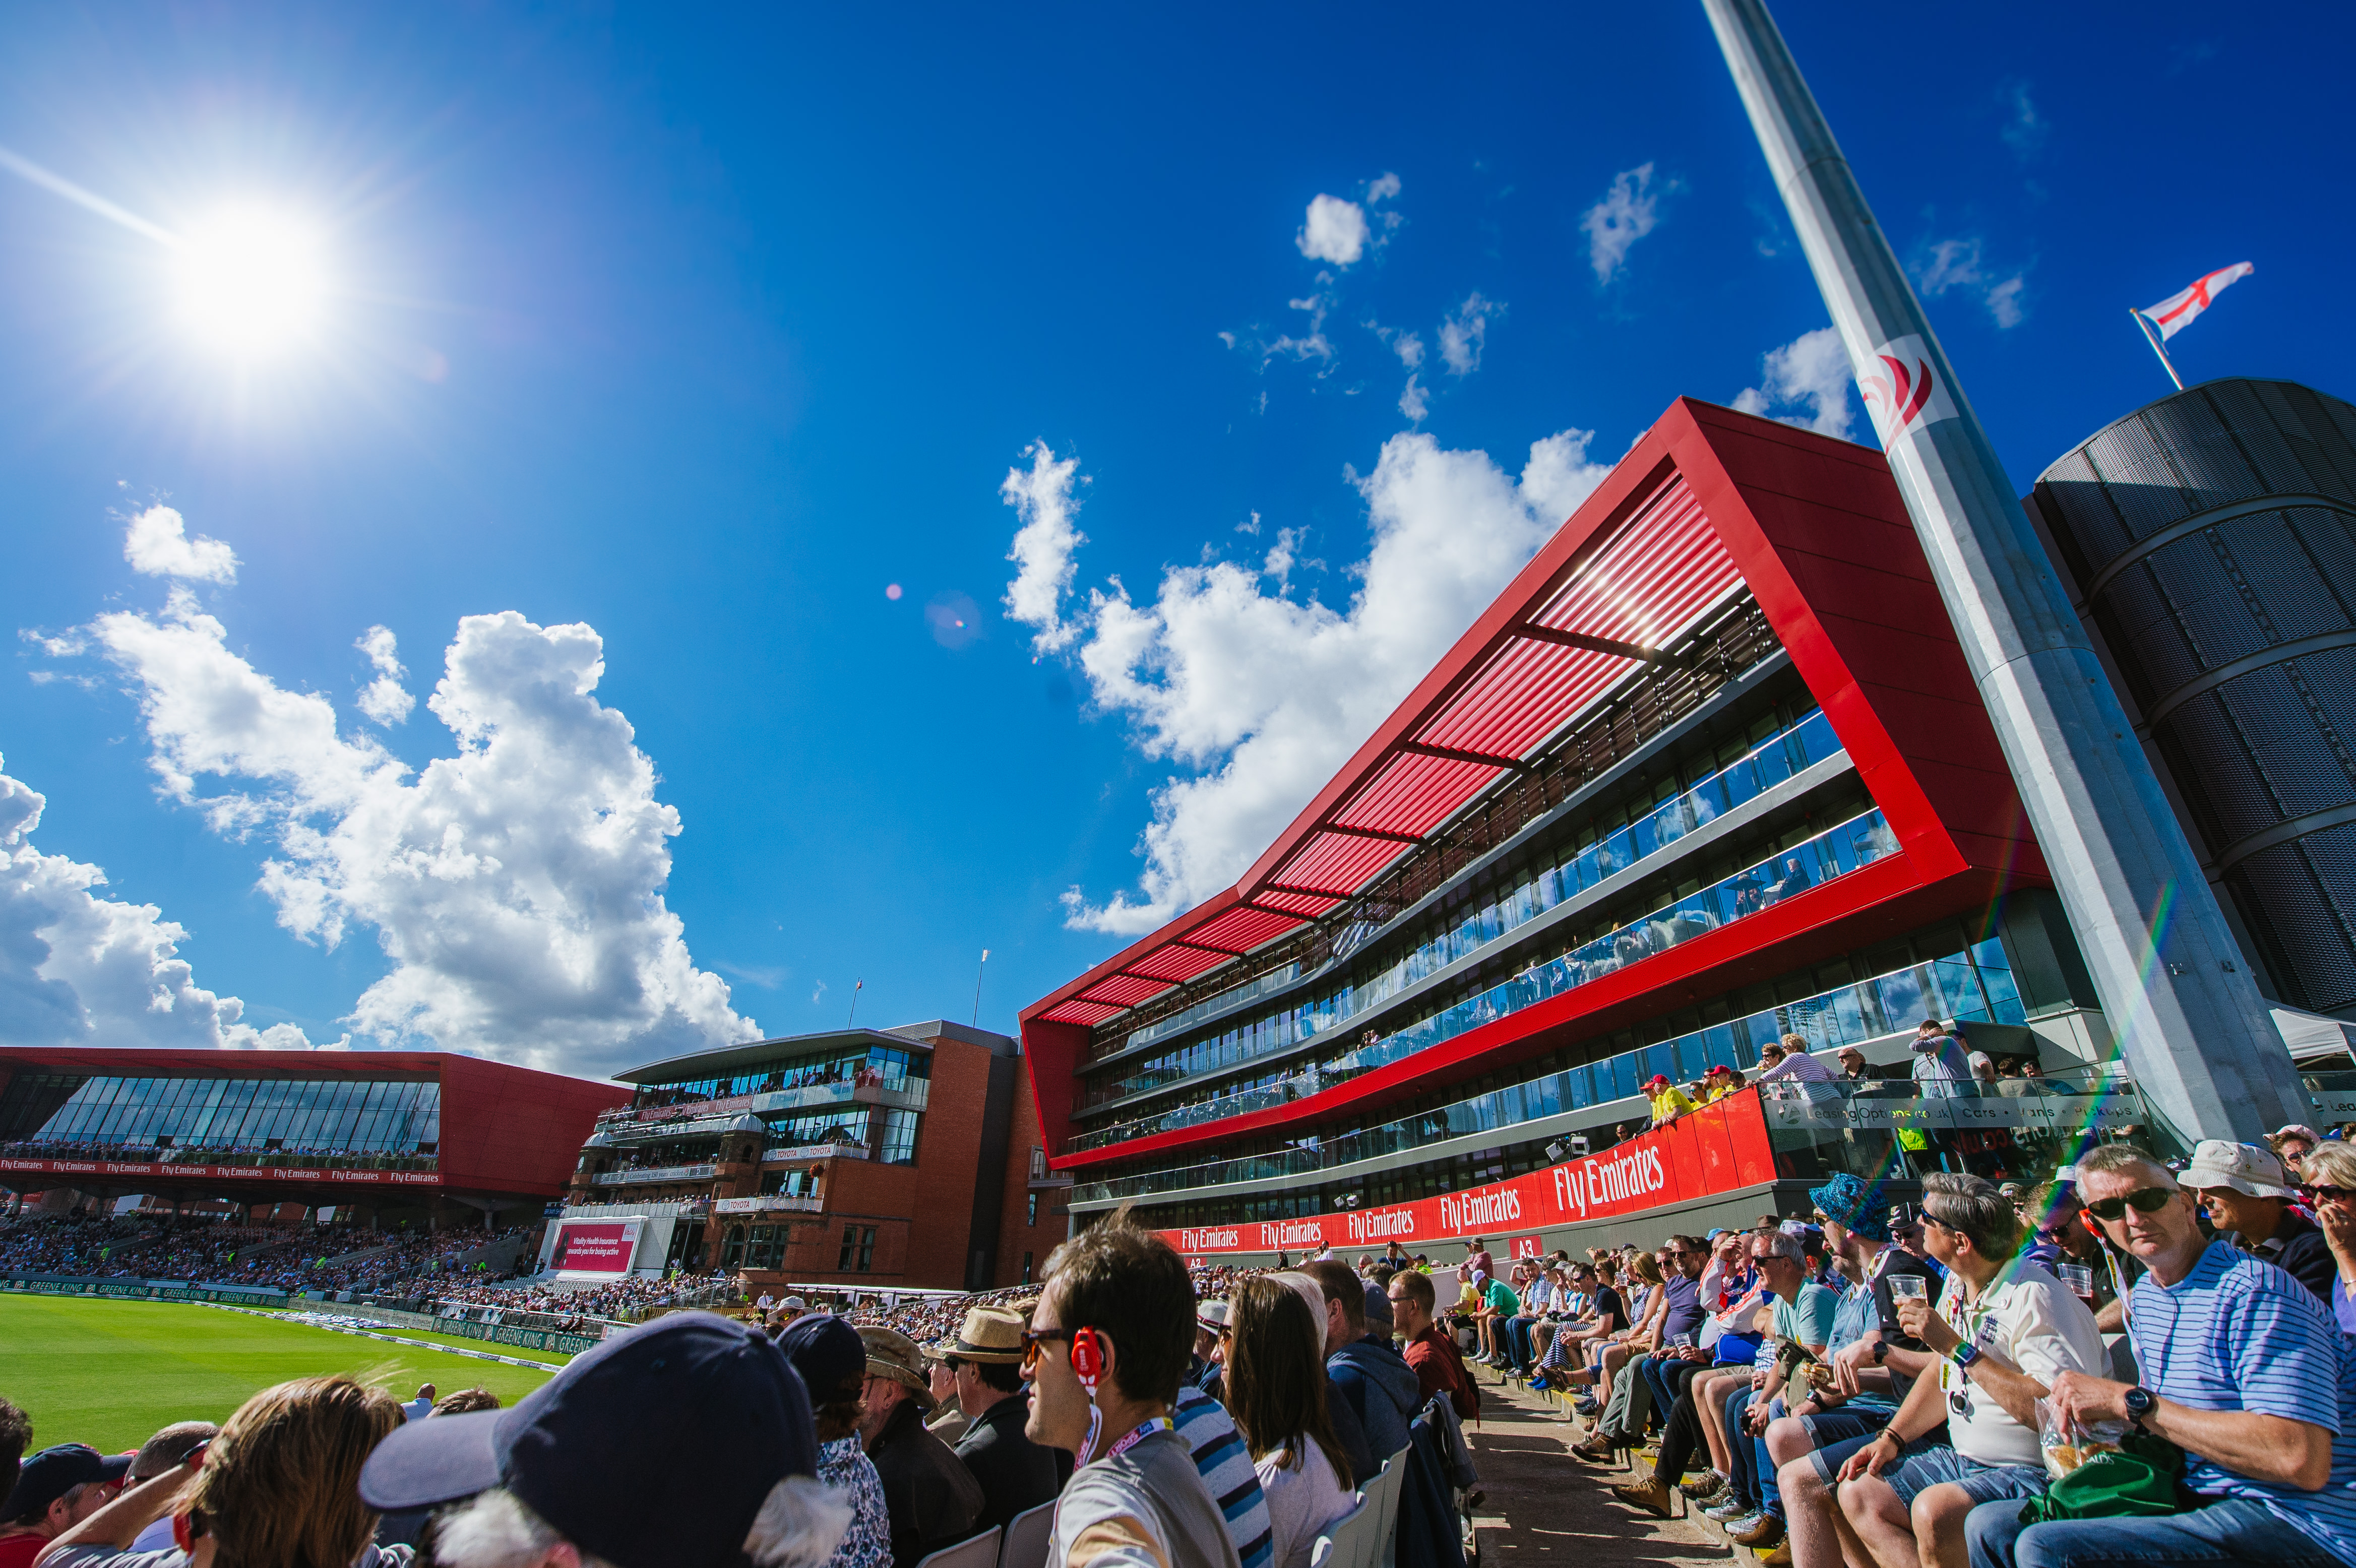 The Point, Pavilion And HGI Manchester At Emirates Old Trafford